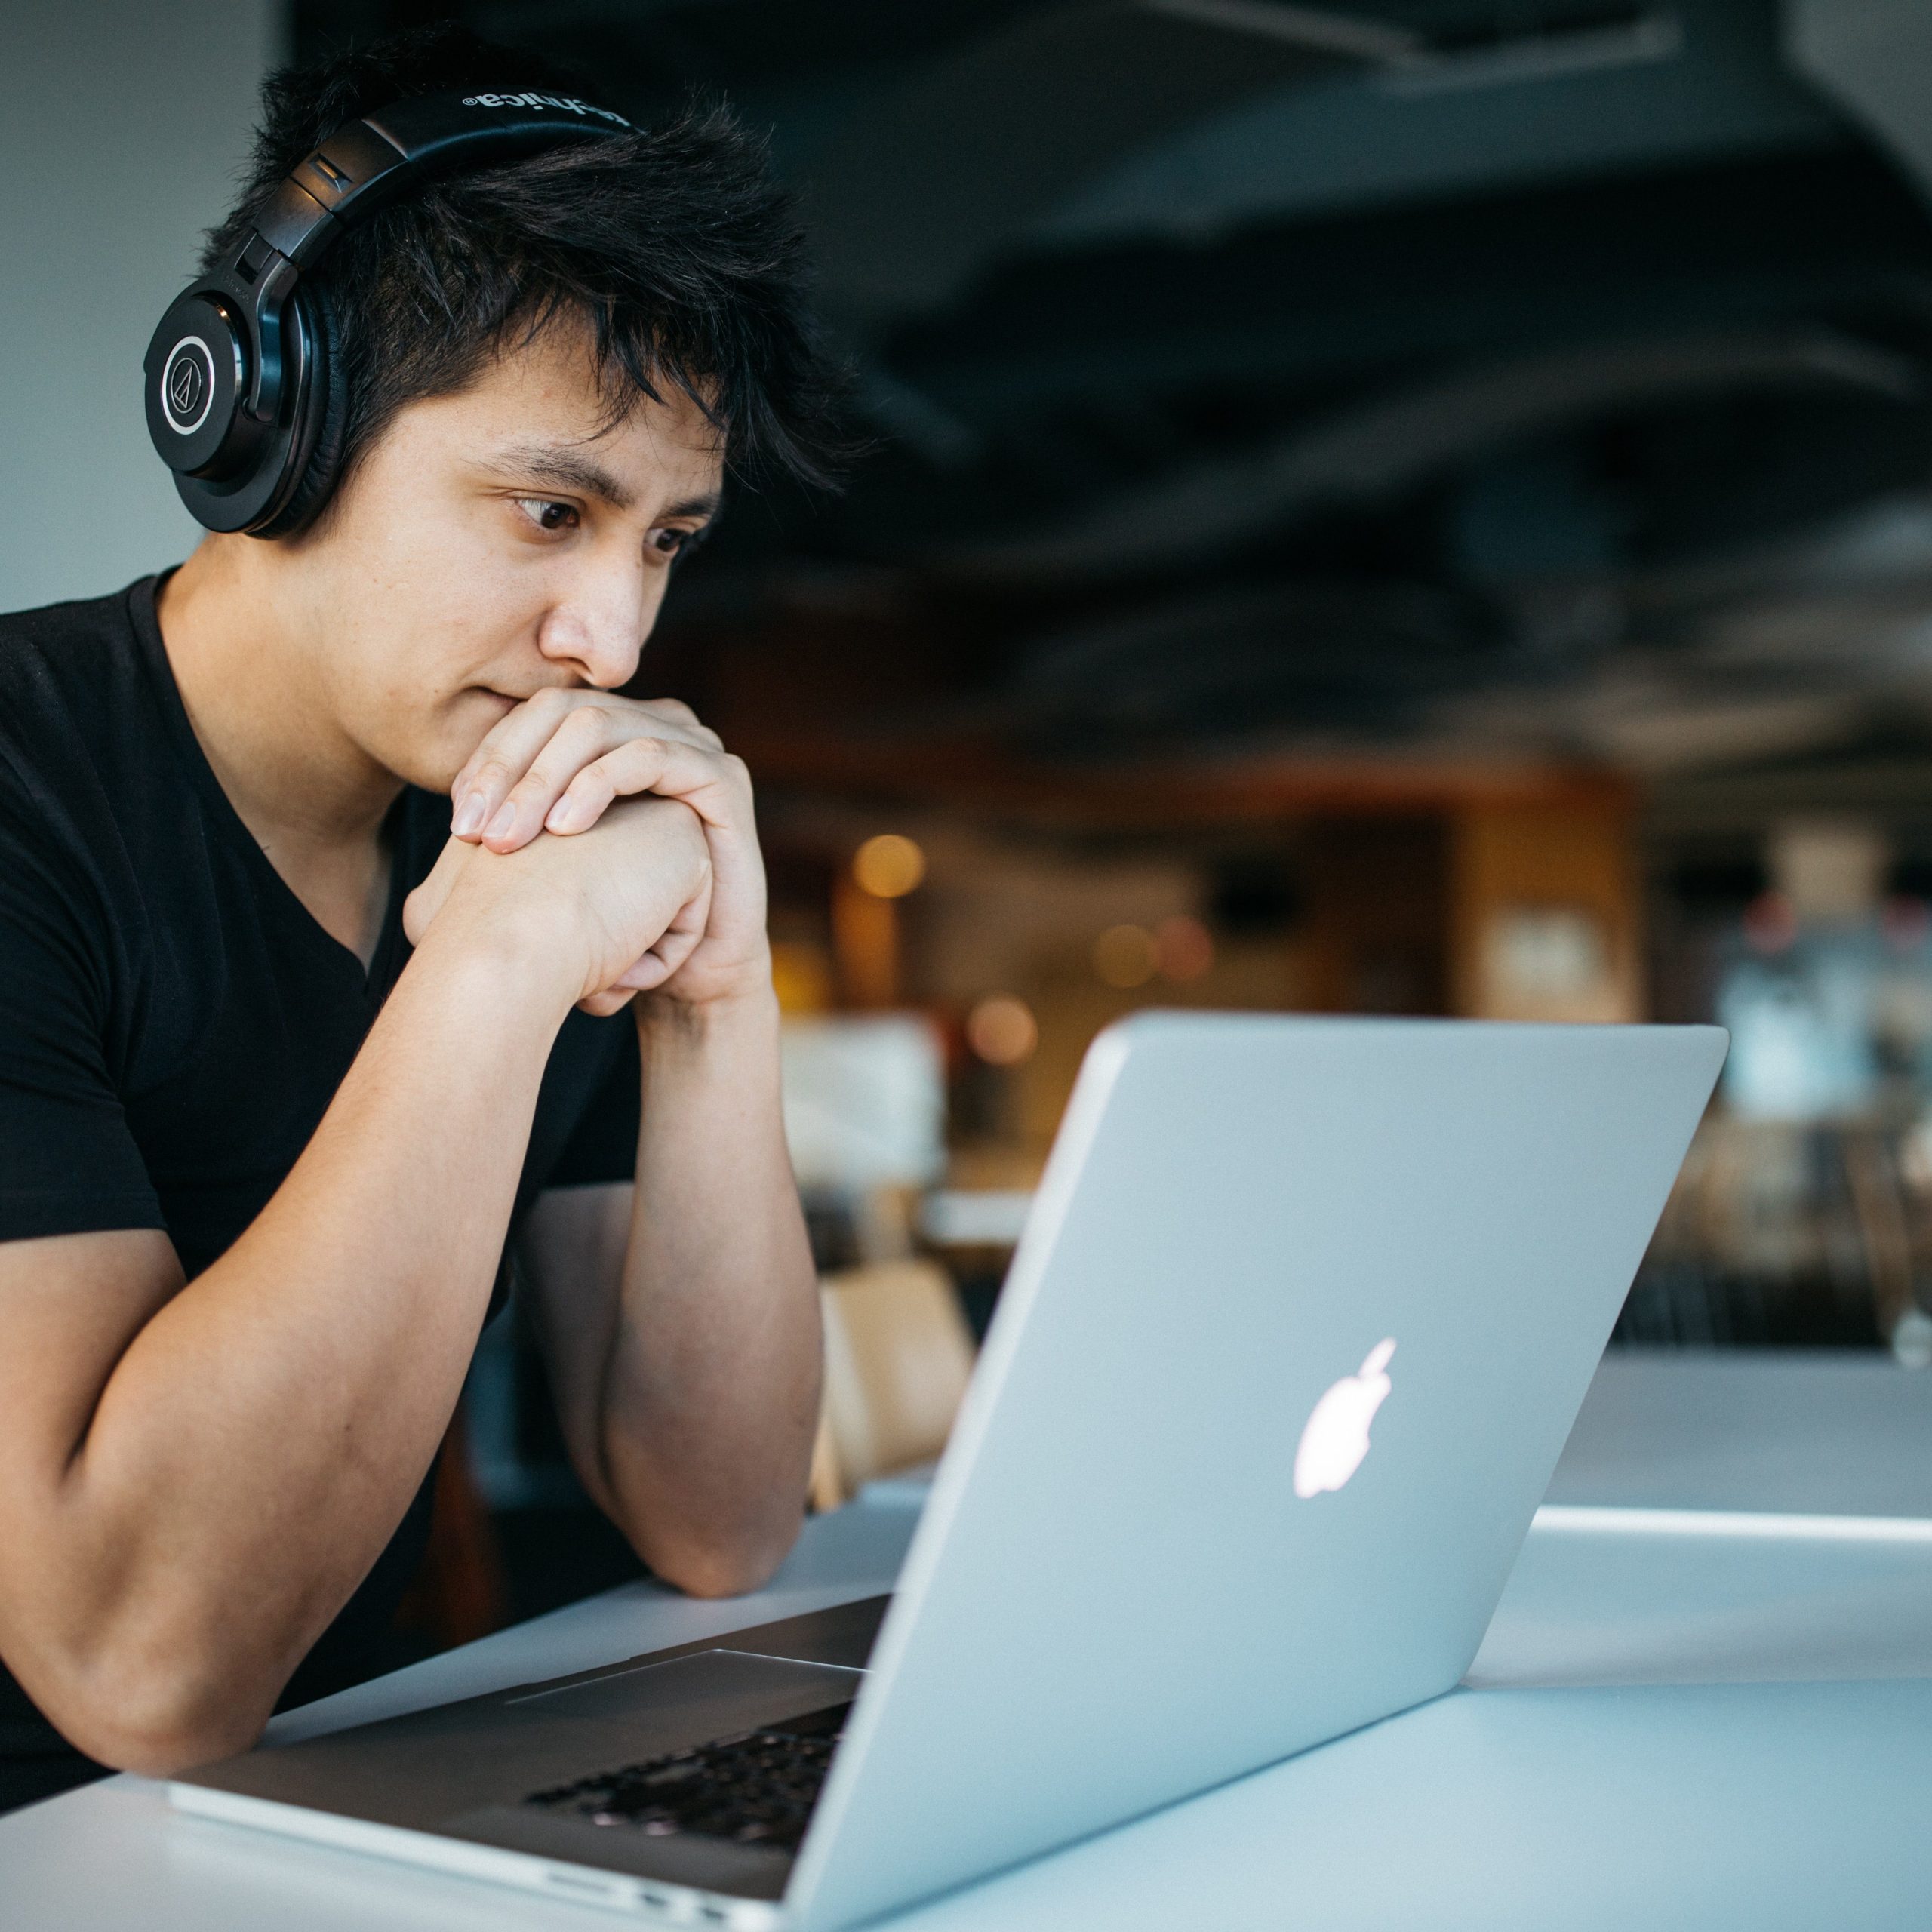 Man with headphones at laptop